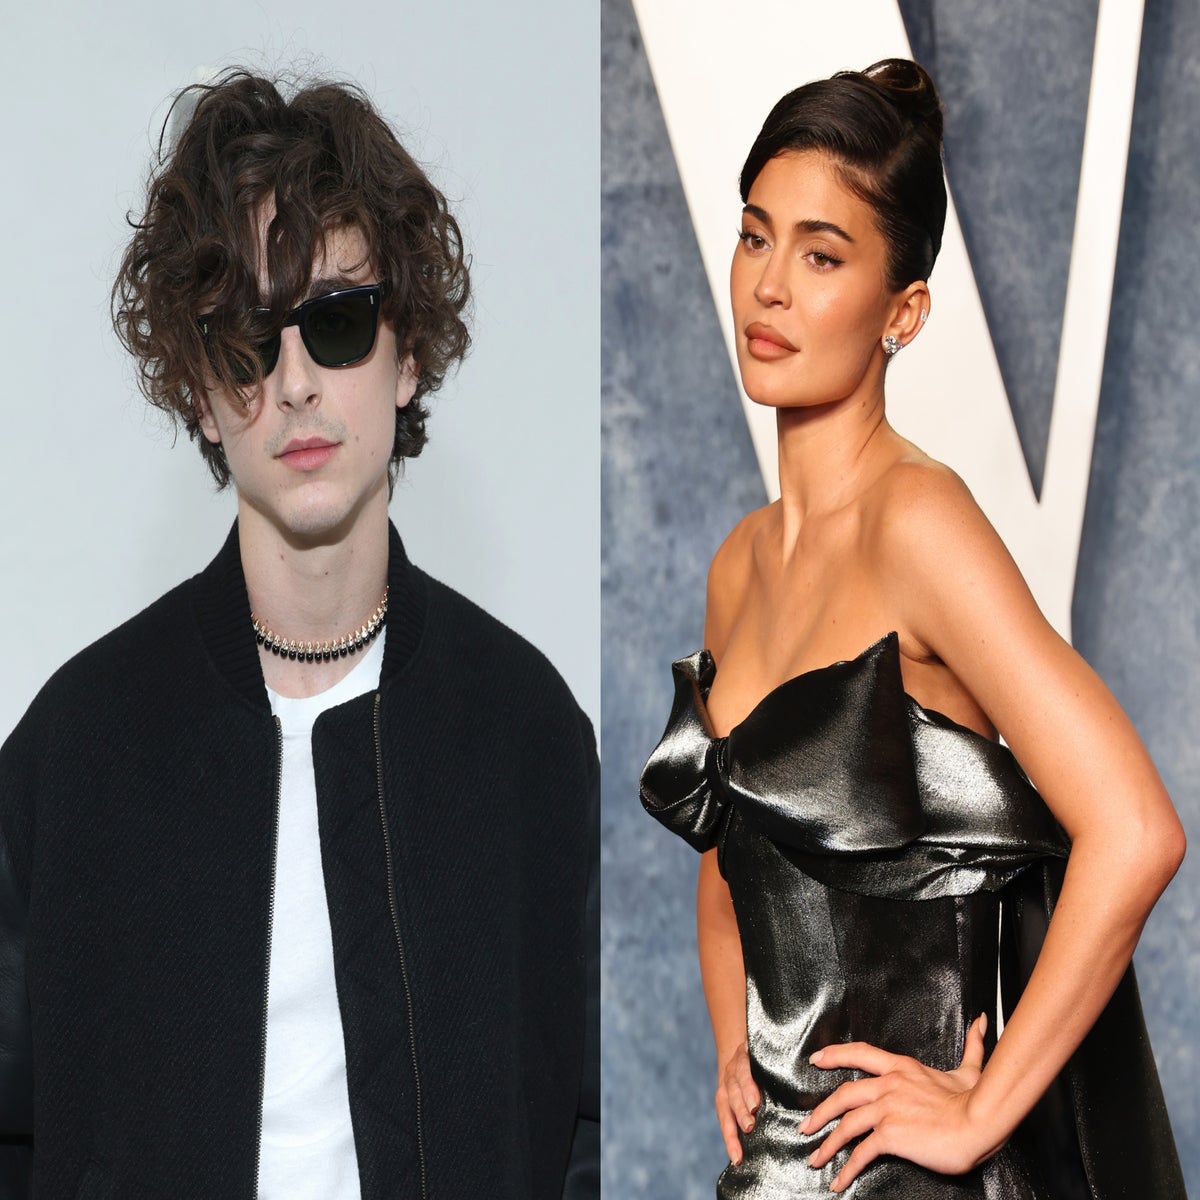 Are Kylie Jenner and Timothee Chalamet Really Dating? Details